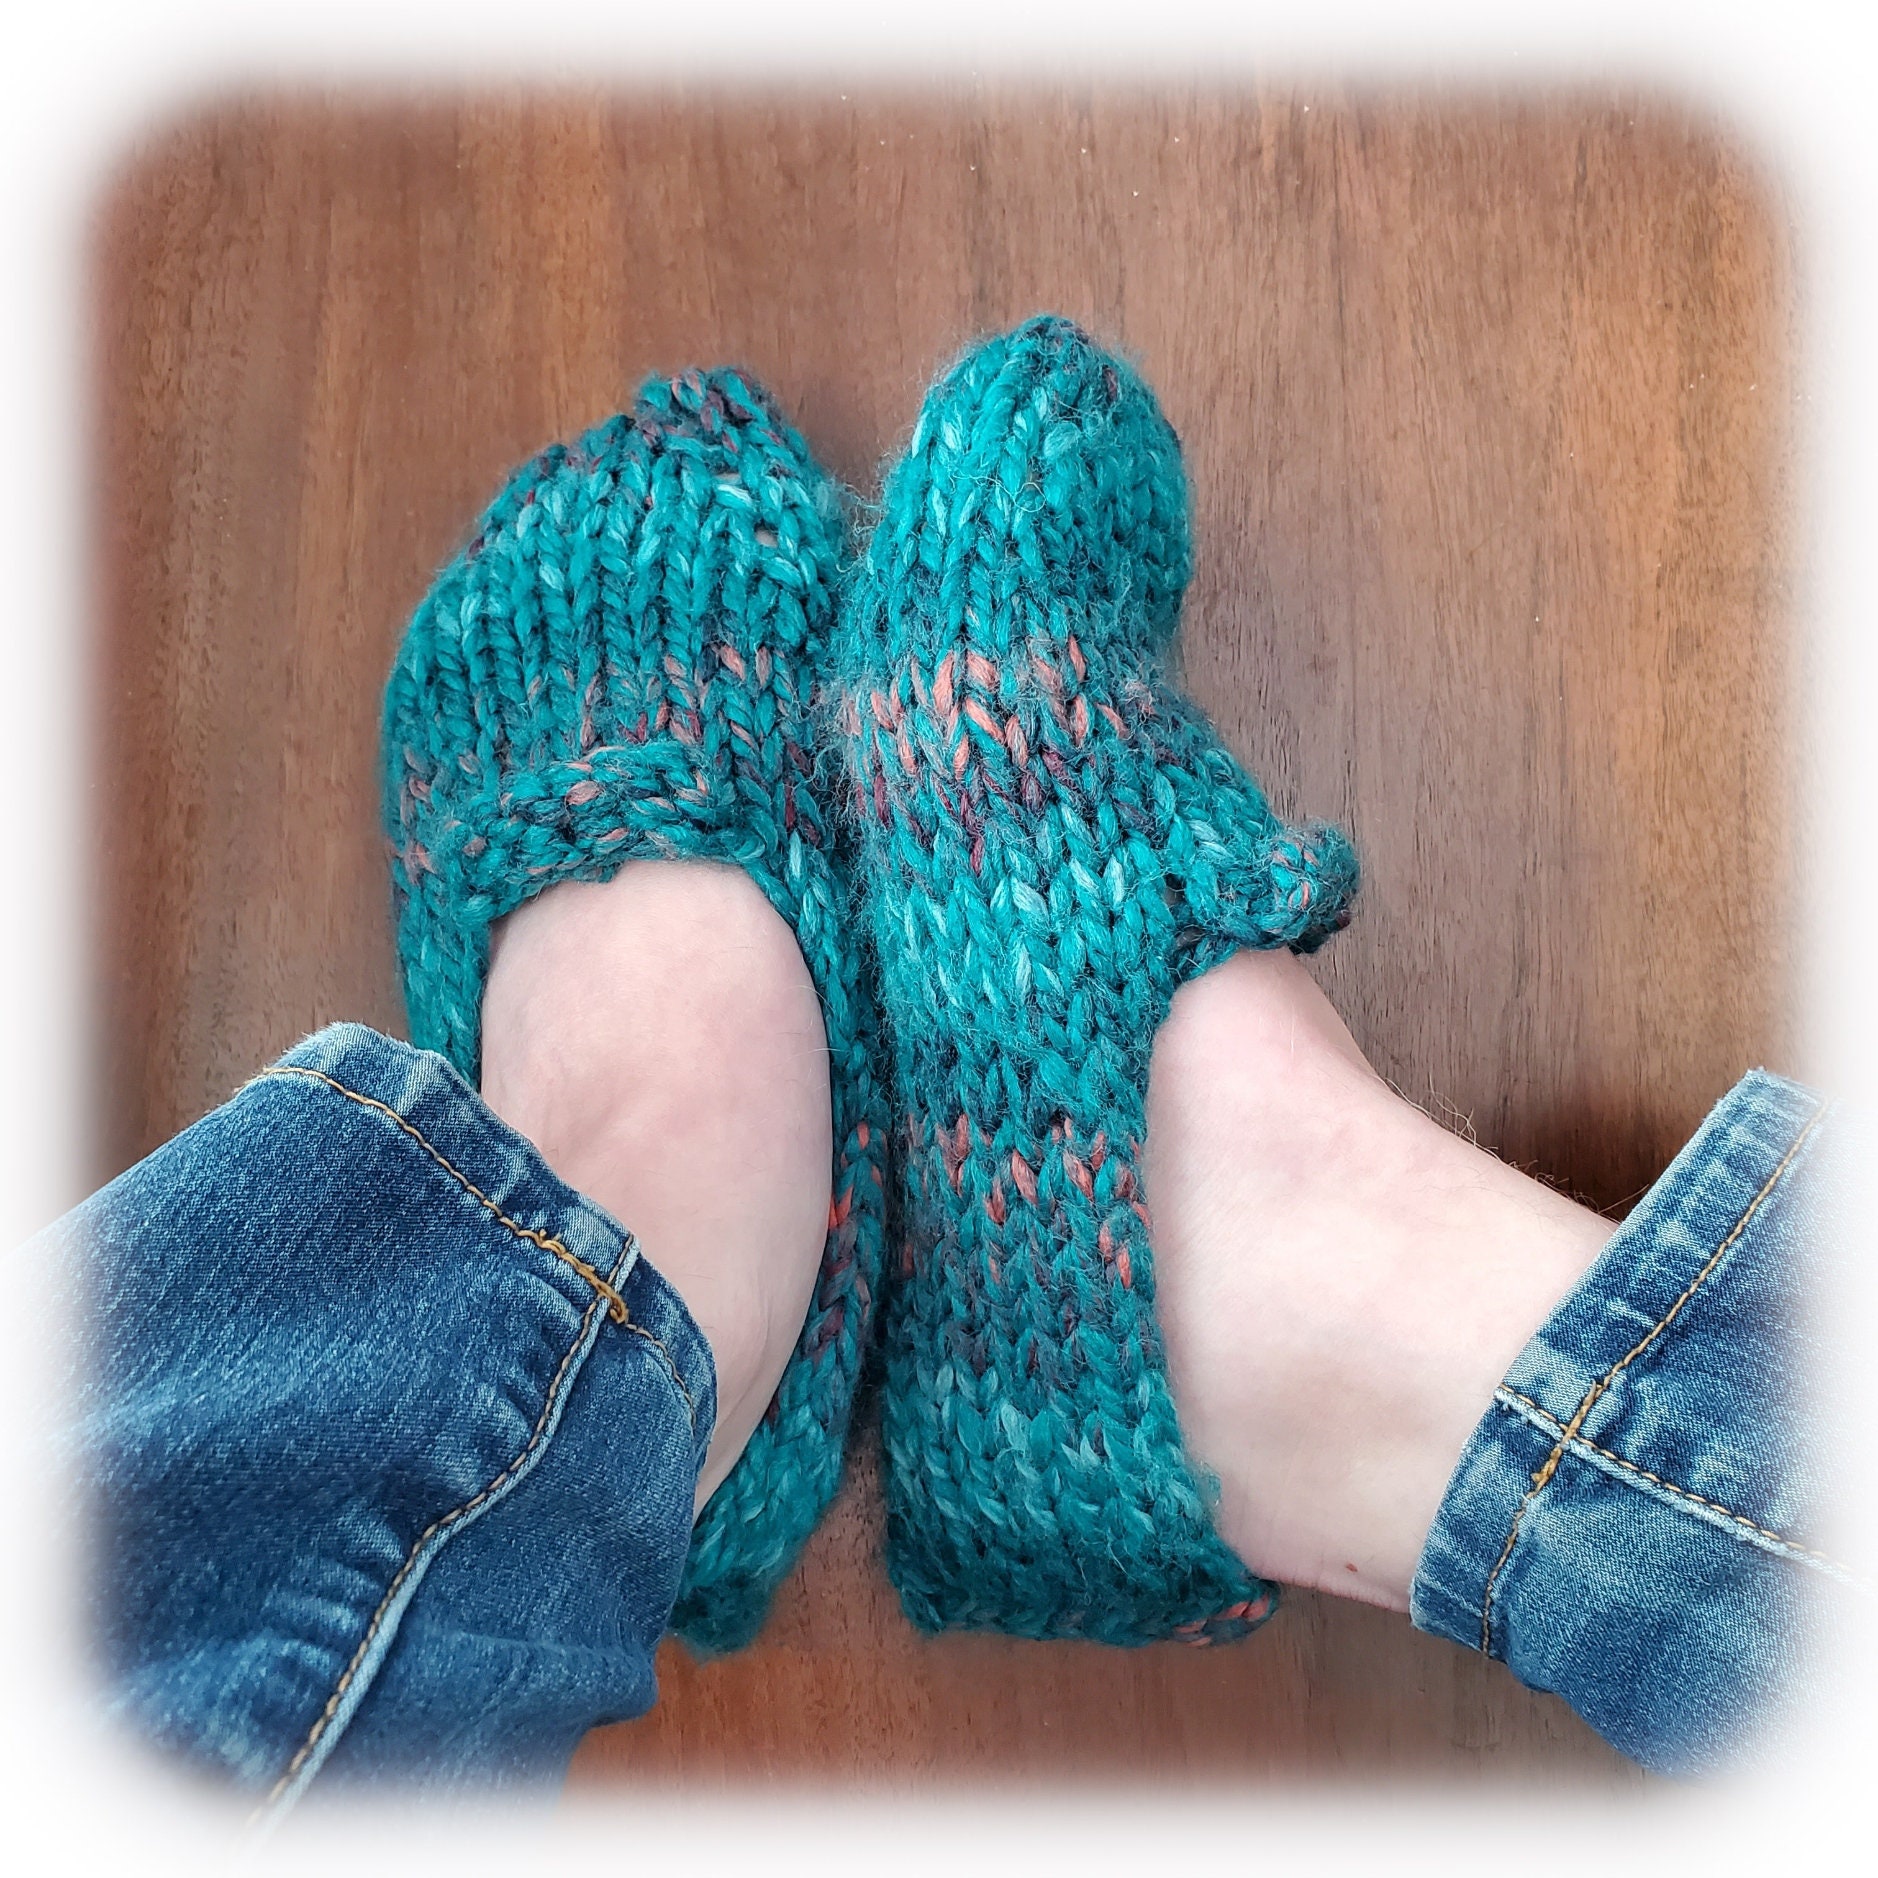 Snazzy Knitted Slippers 1 and 2 | MelsNattyKnits